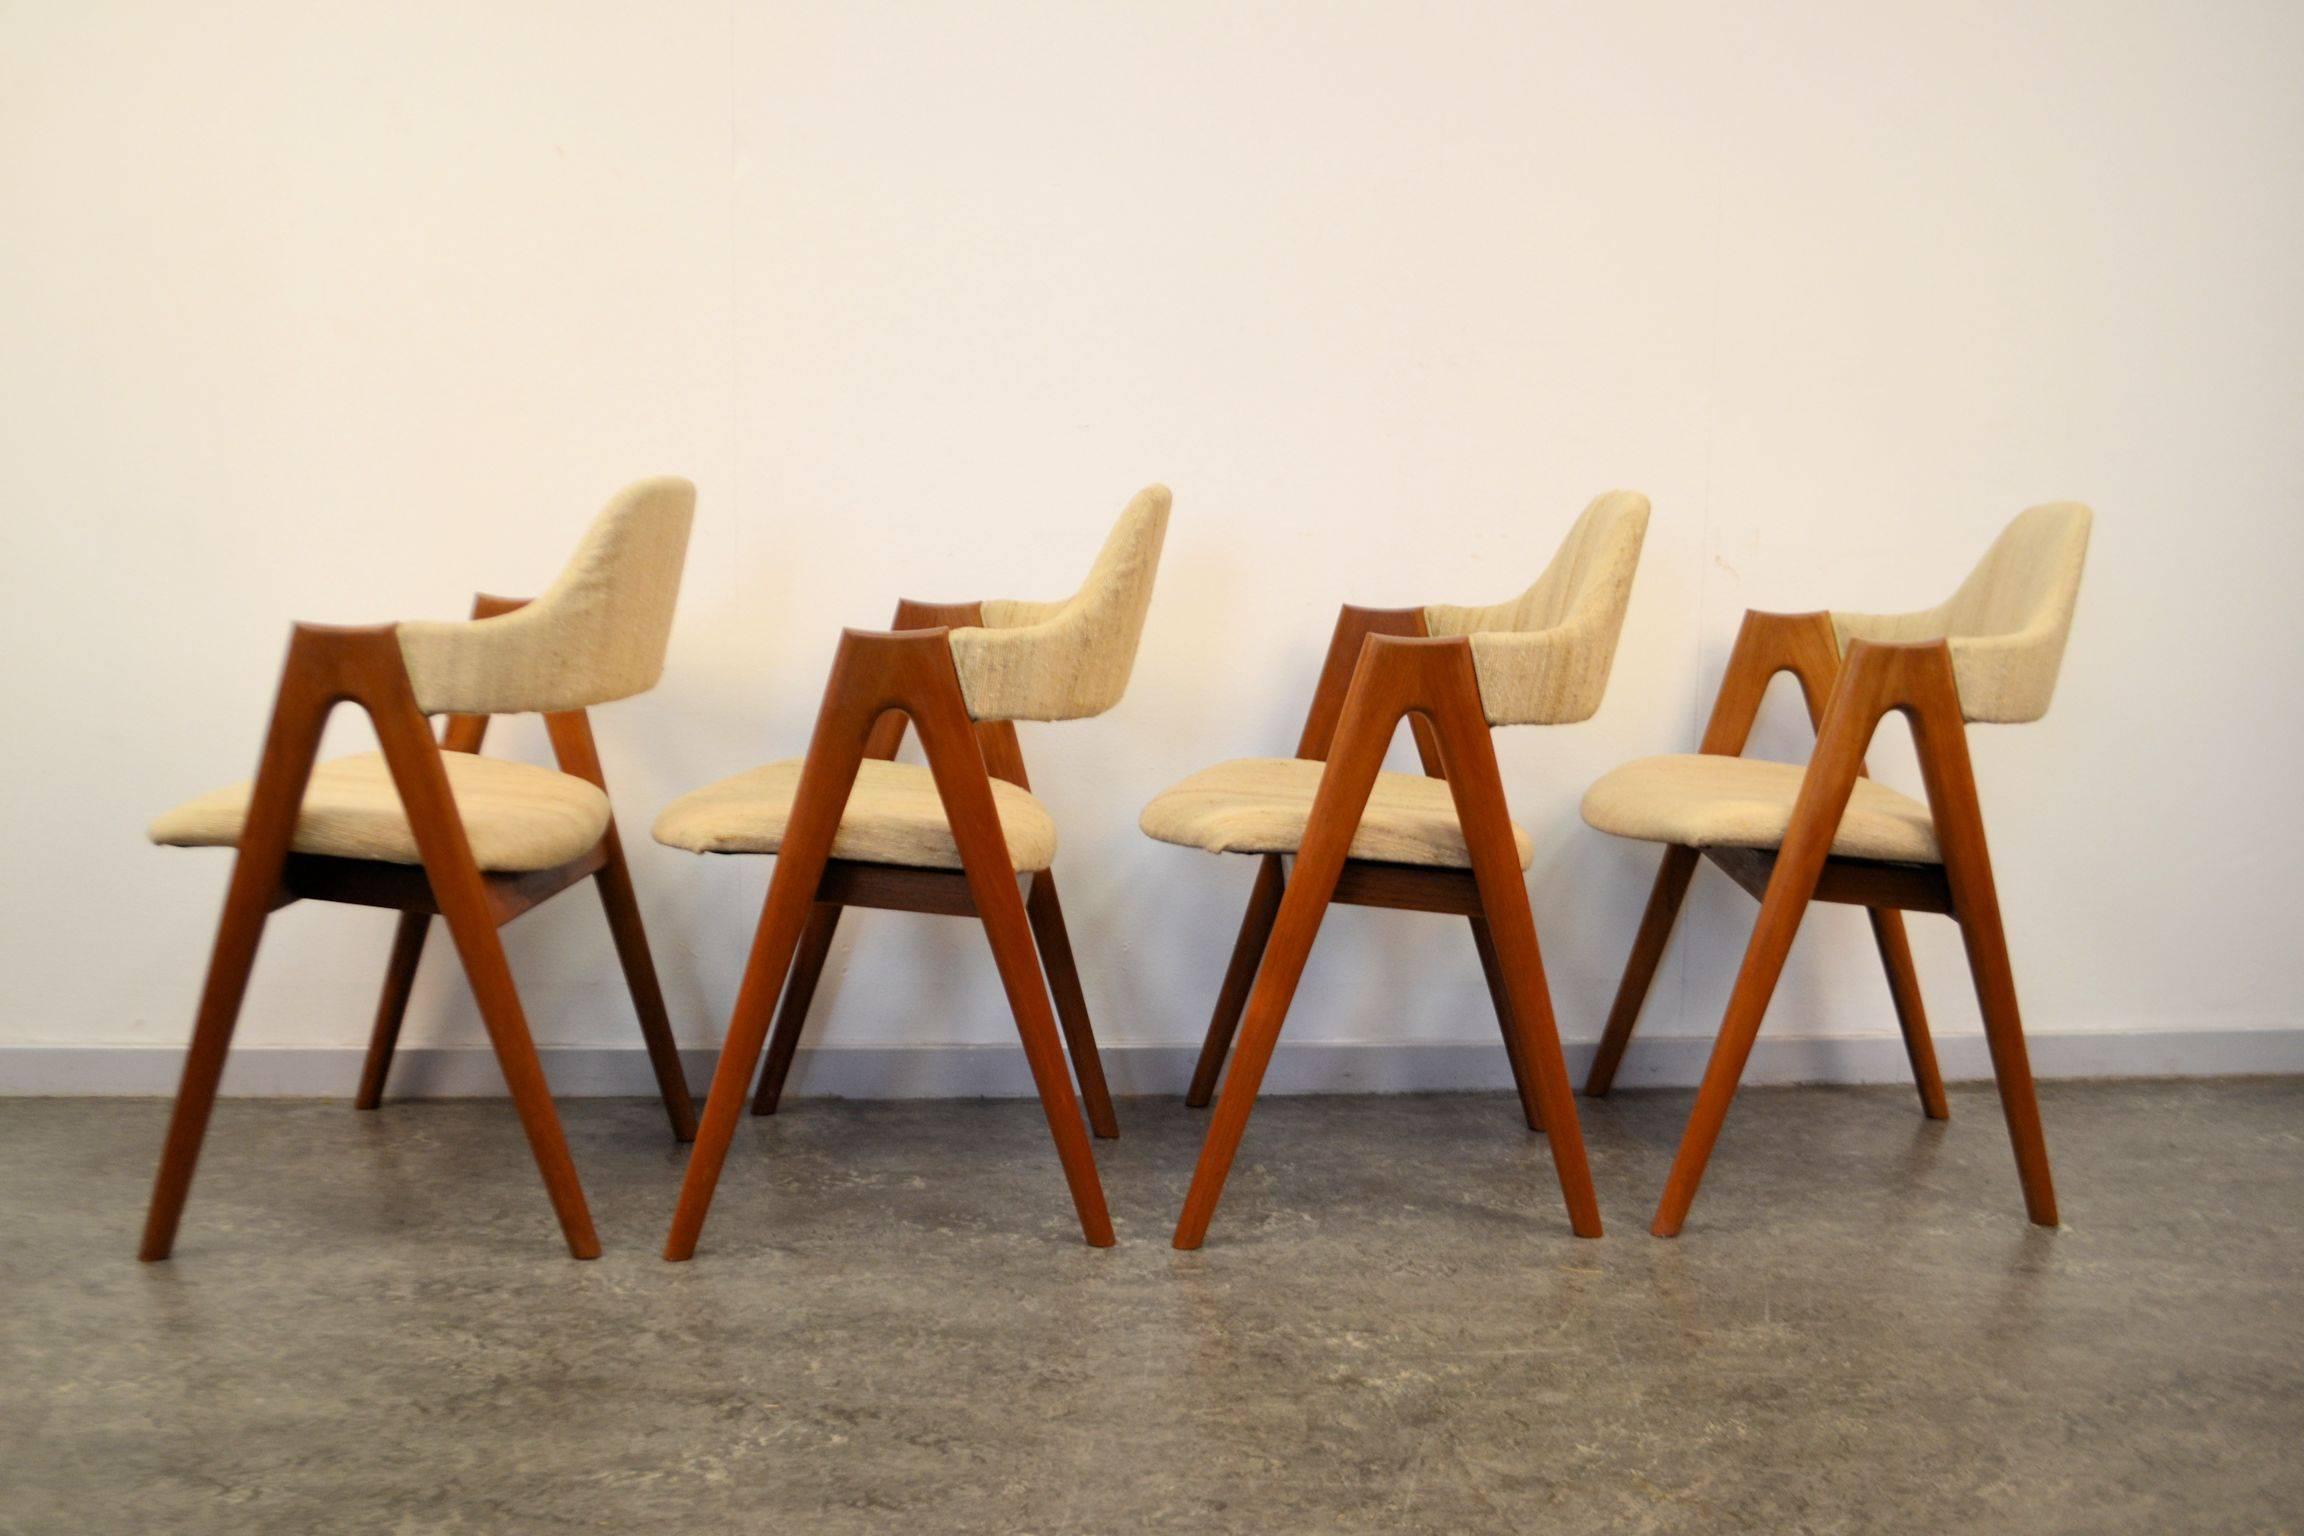 Danish modern “Compass” dining chairs designed by Kai Kristiansen for SVA Møbler, Denmark. Kristiansen’s designs are well-known representative examples of Danish, mid-20th century furniture.
These solid teak chairs feature a unique design,